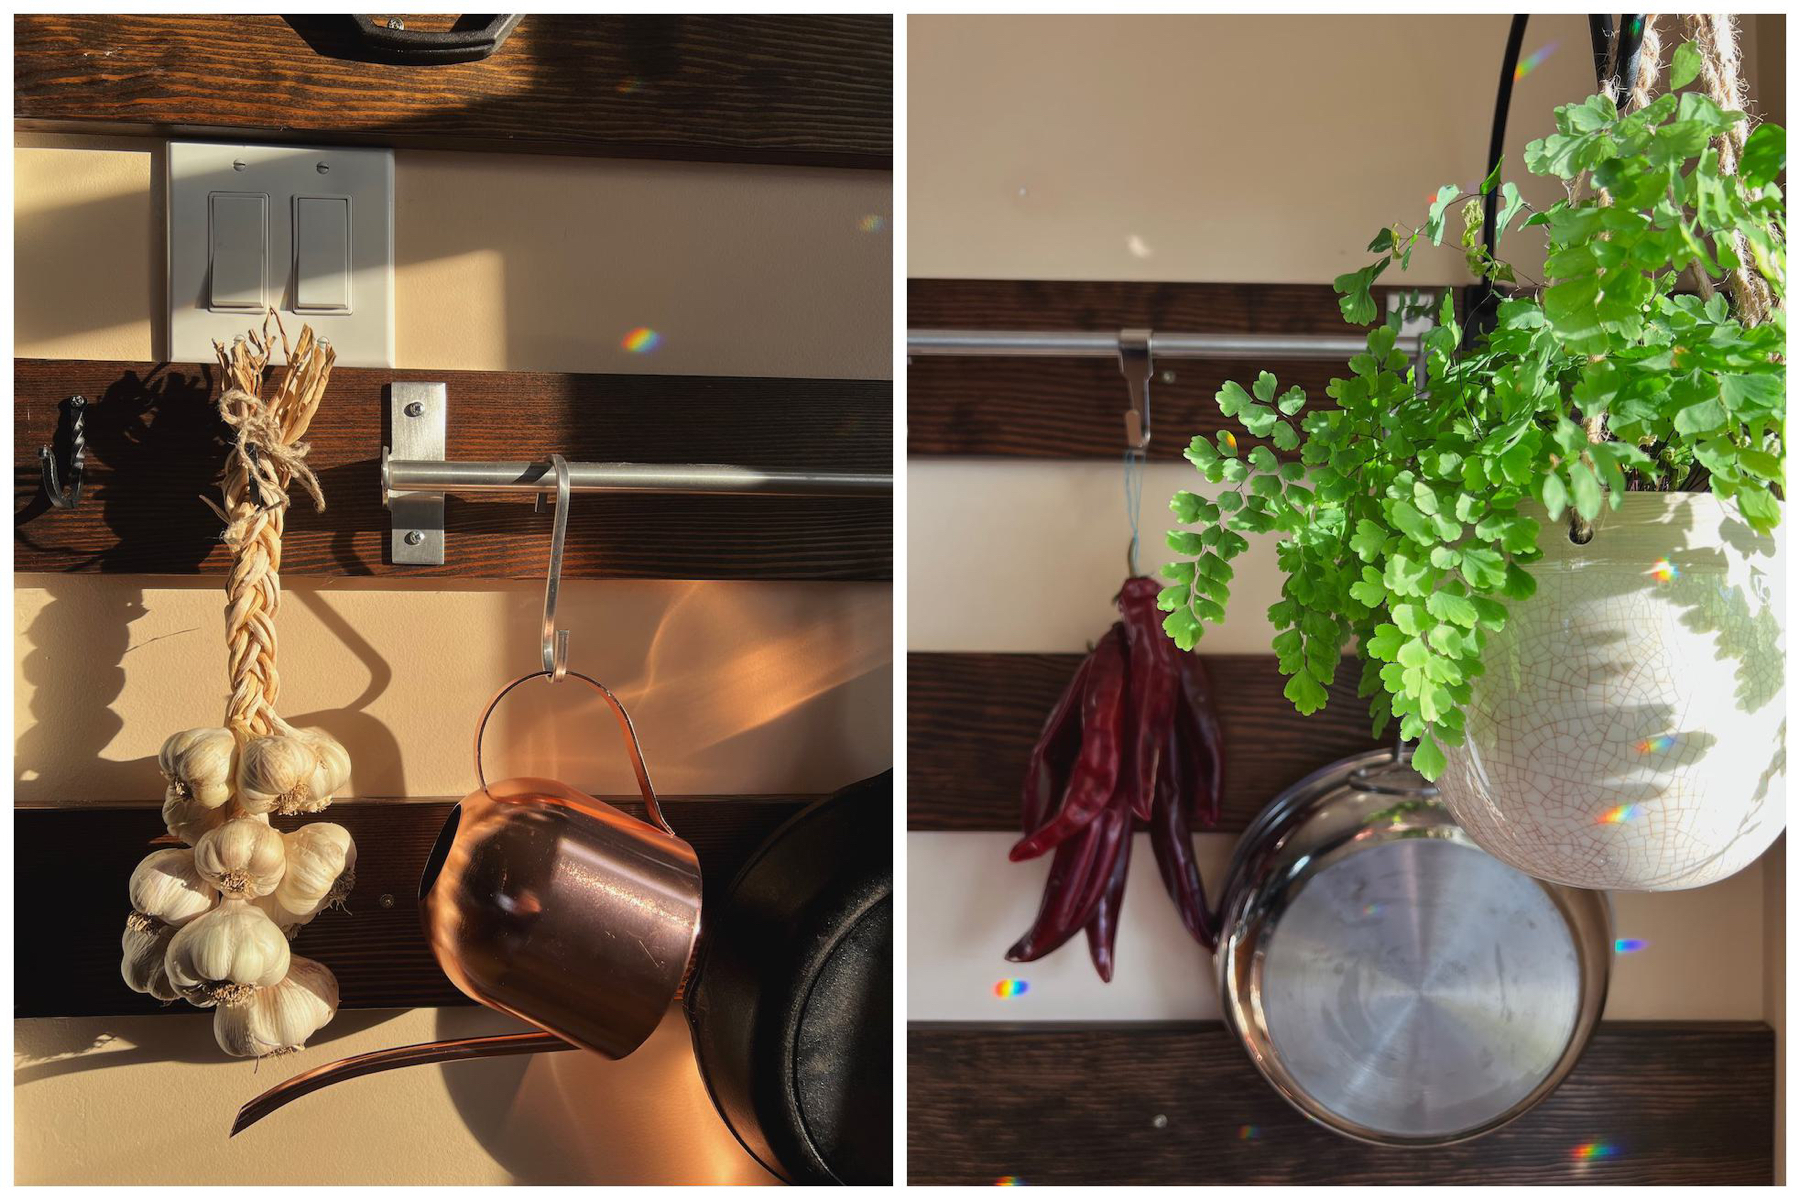 A diptych showing details of various things hanging off the rack, a planter, dry red chillis, a bunch of garlic pigtailed together and a small plant watering can.